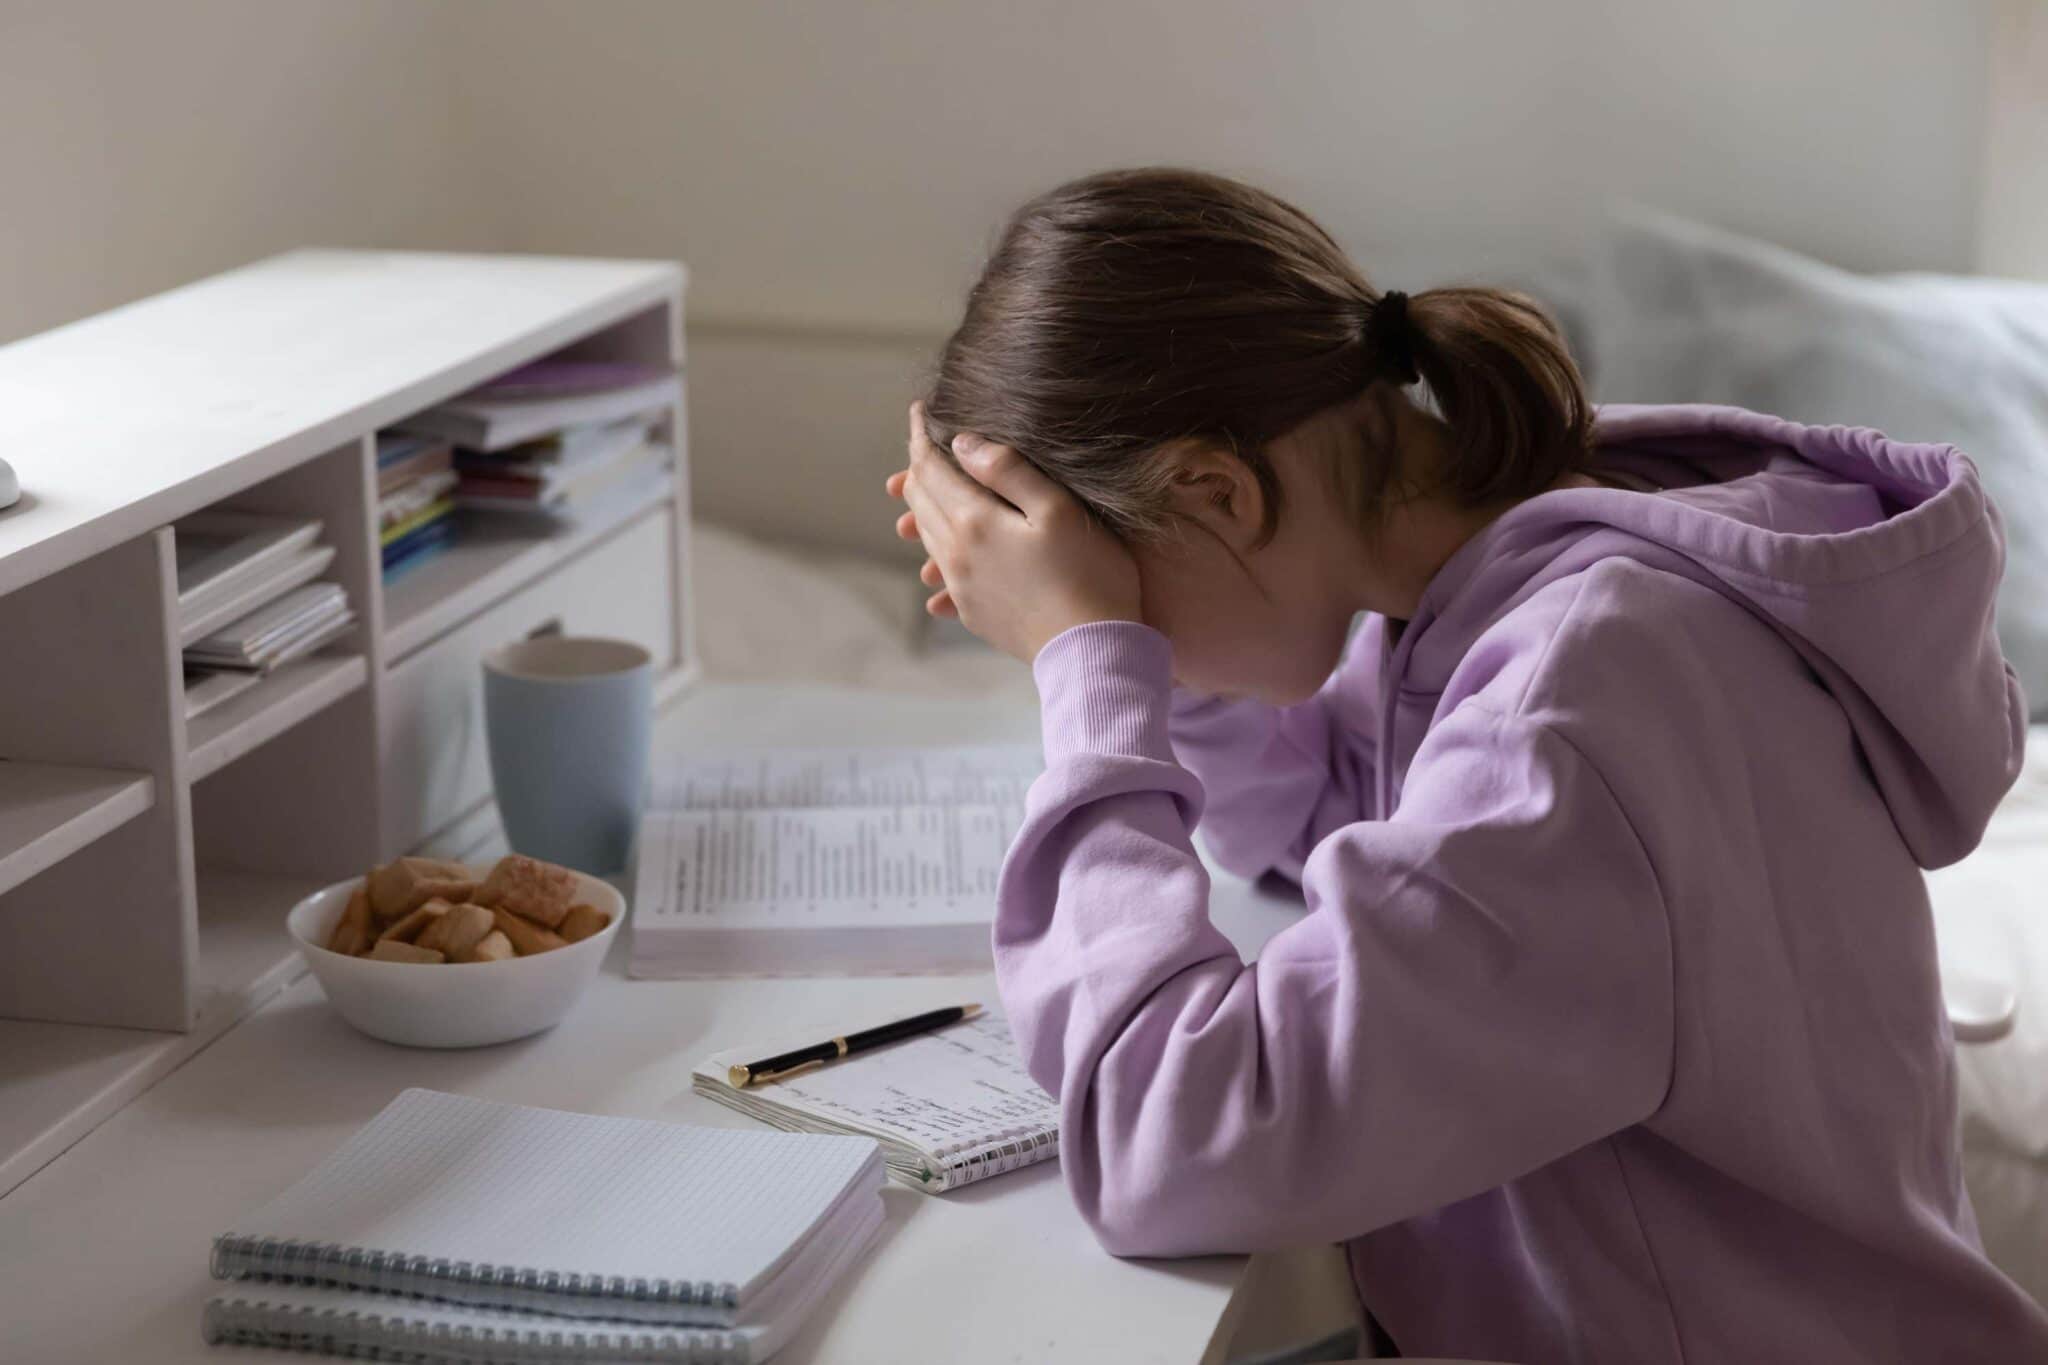 Young girl looks stressed over her desk